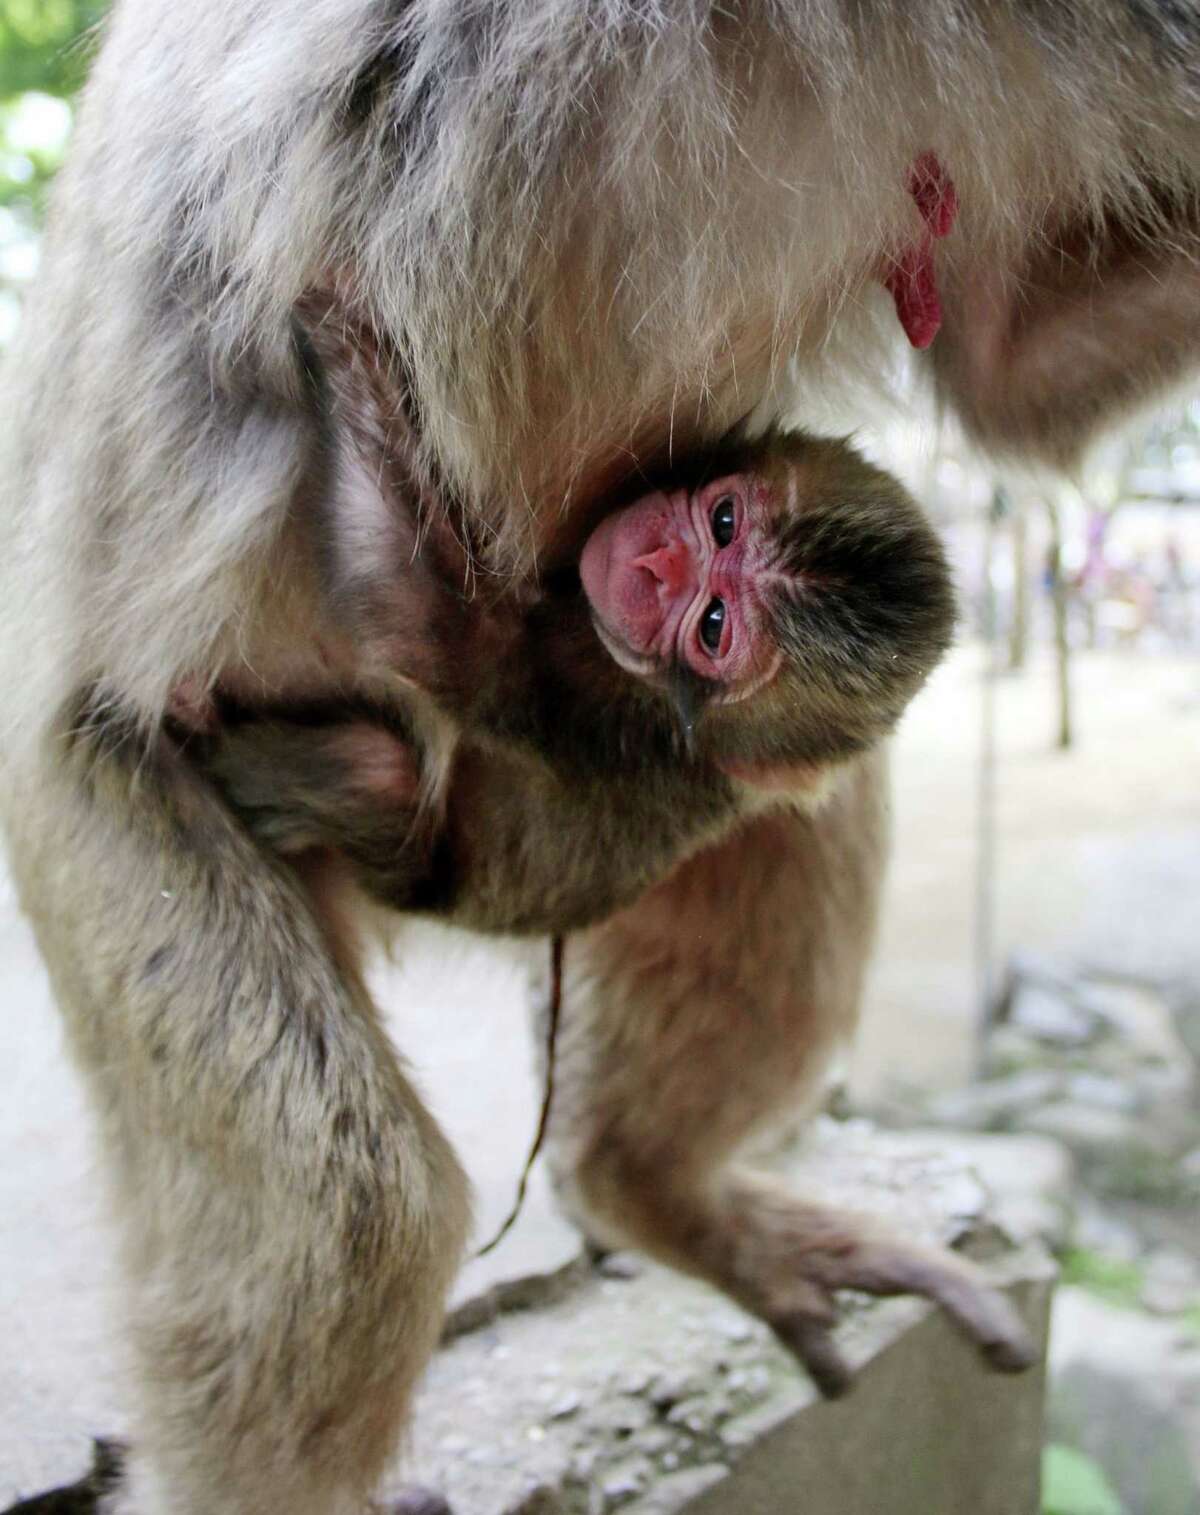 In this Wednesdayfile photo released by the Takasakiyama Natural Zoological Garden, a newborn baby monkey named Charlotte clings to her mother at the zoo in Oita, southern Japan.